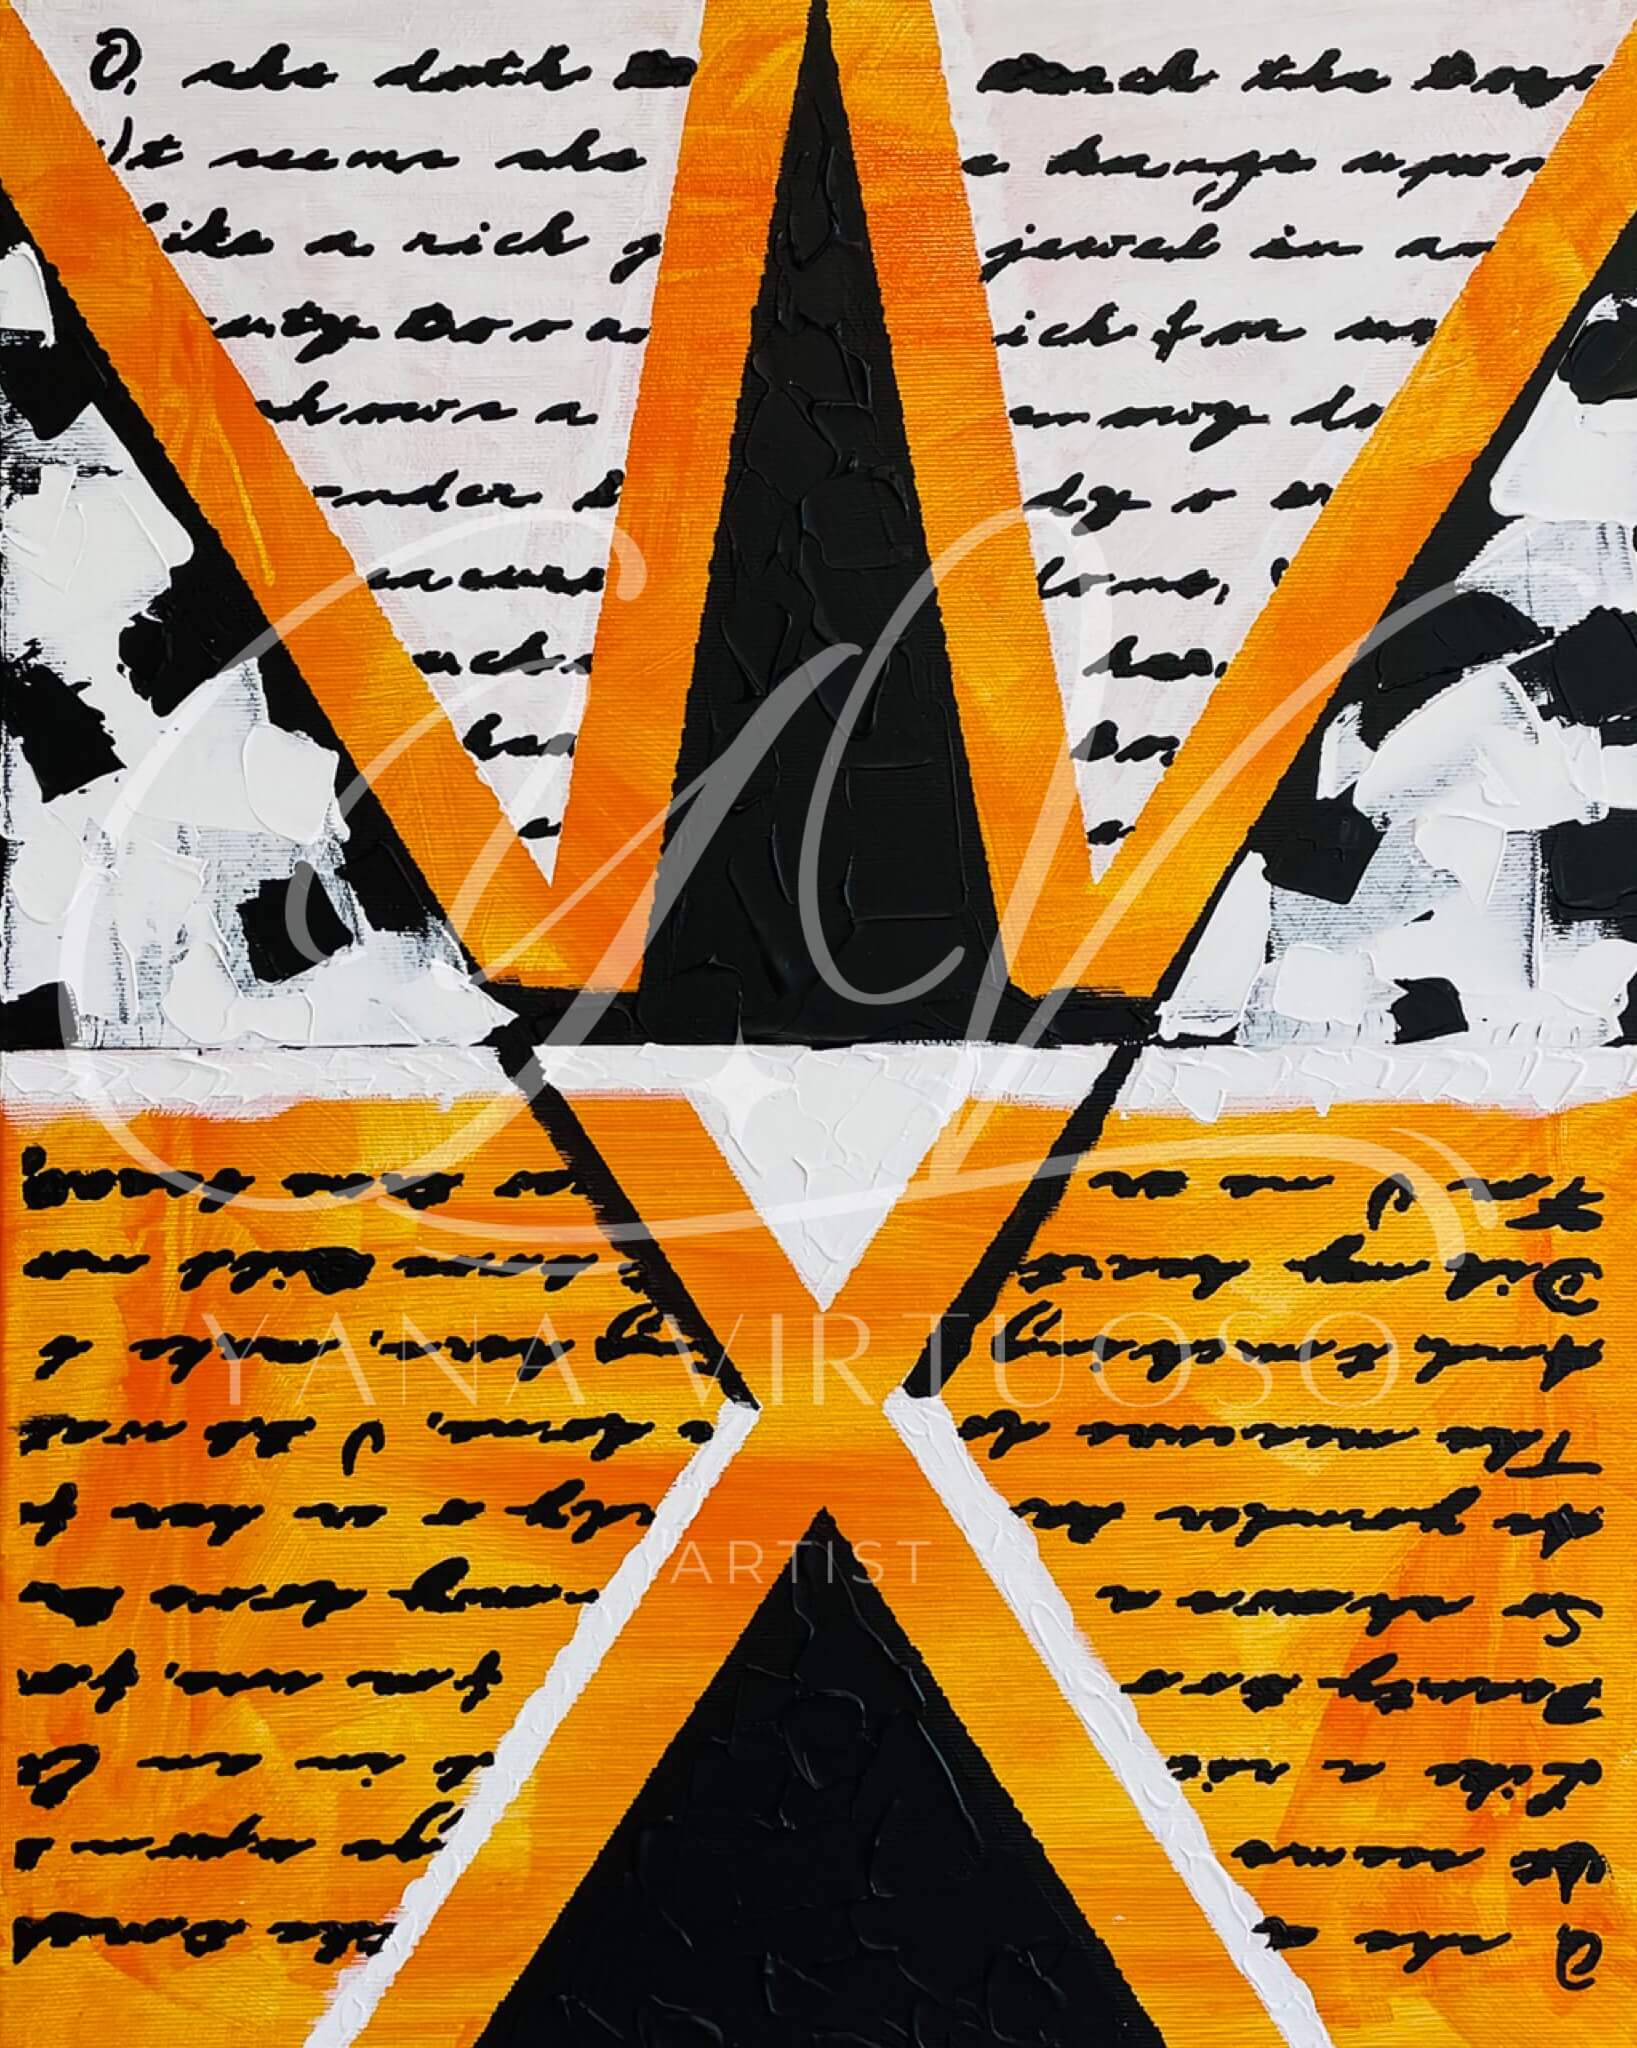 Close-up view of the "Unfinished Story" painting highlighting the detailed text elements and the contrast between the vibrant orange and pristine white sections.